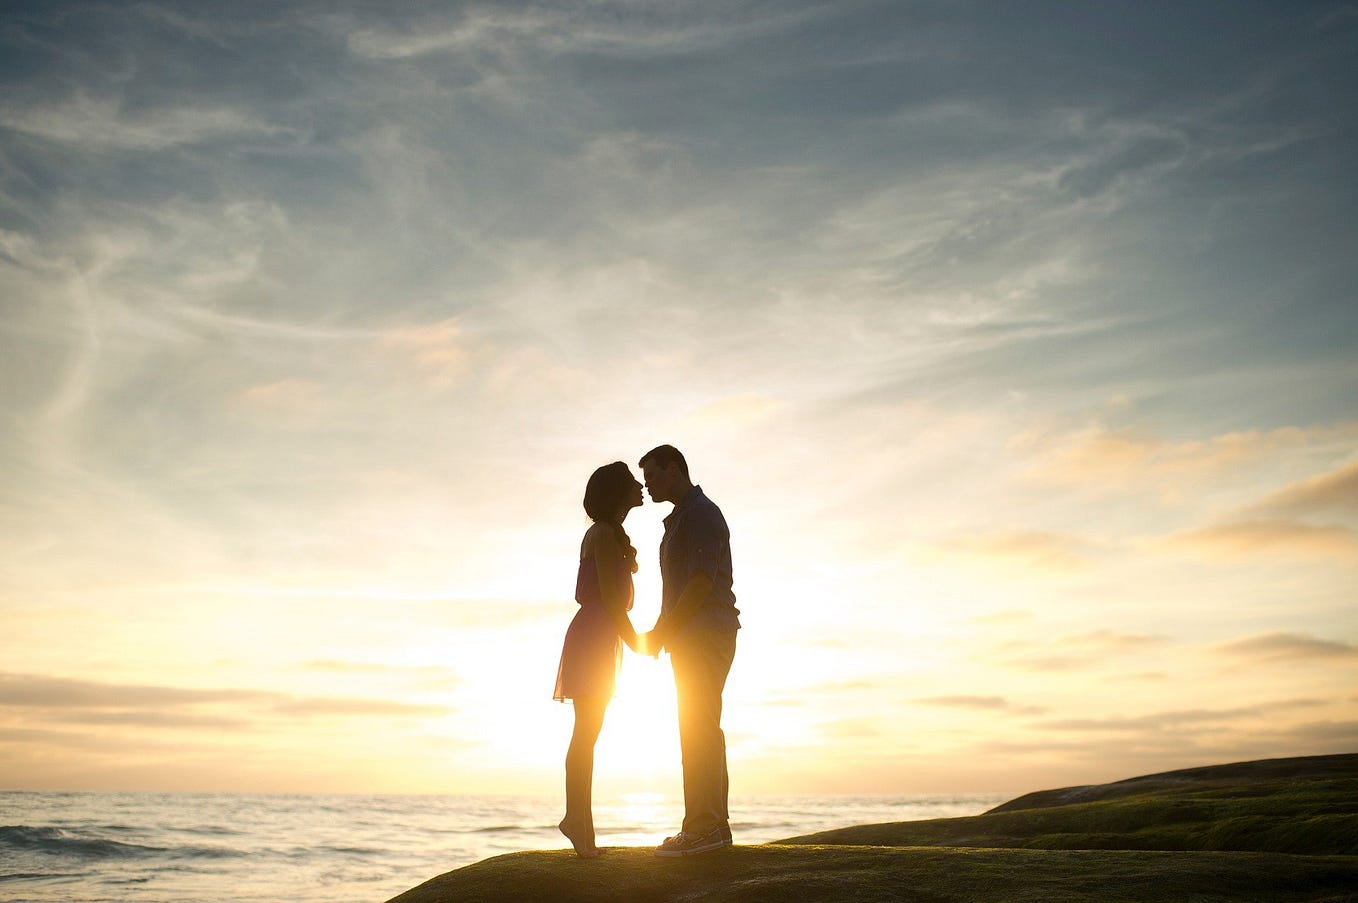 Why I Believe Fate Plays A Major Role In Finding Love